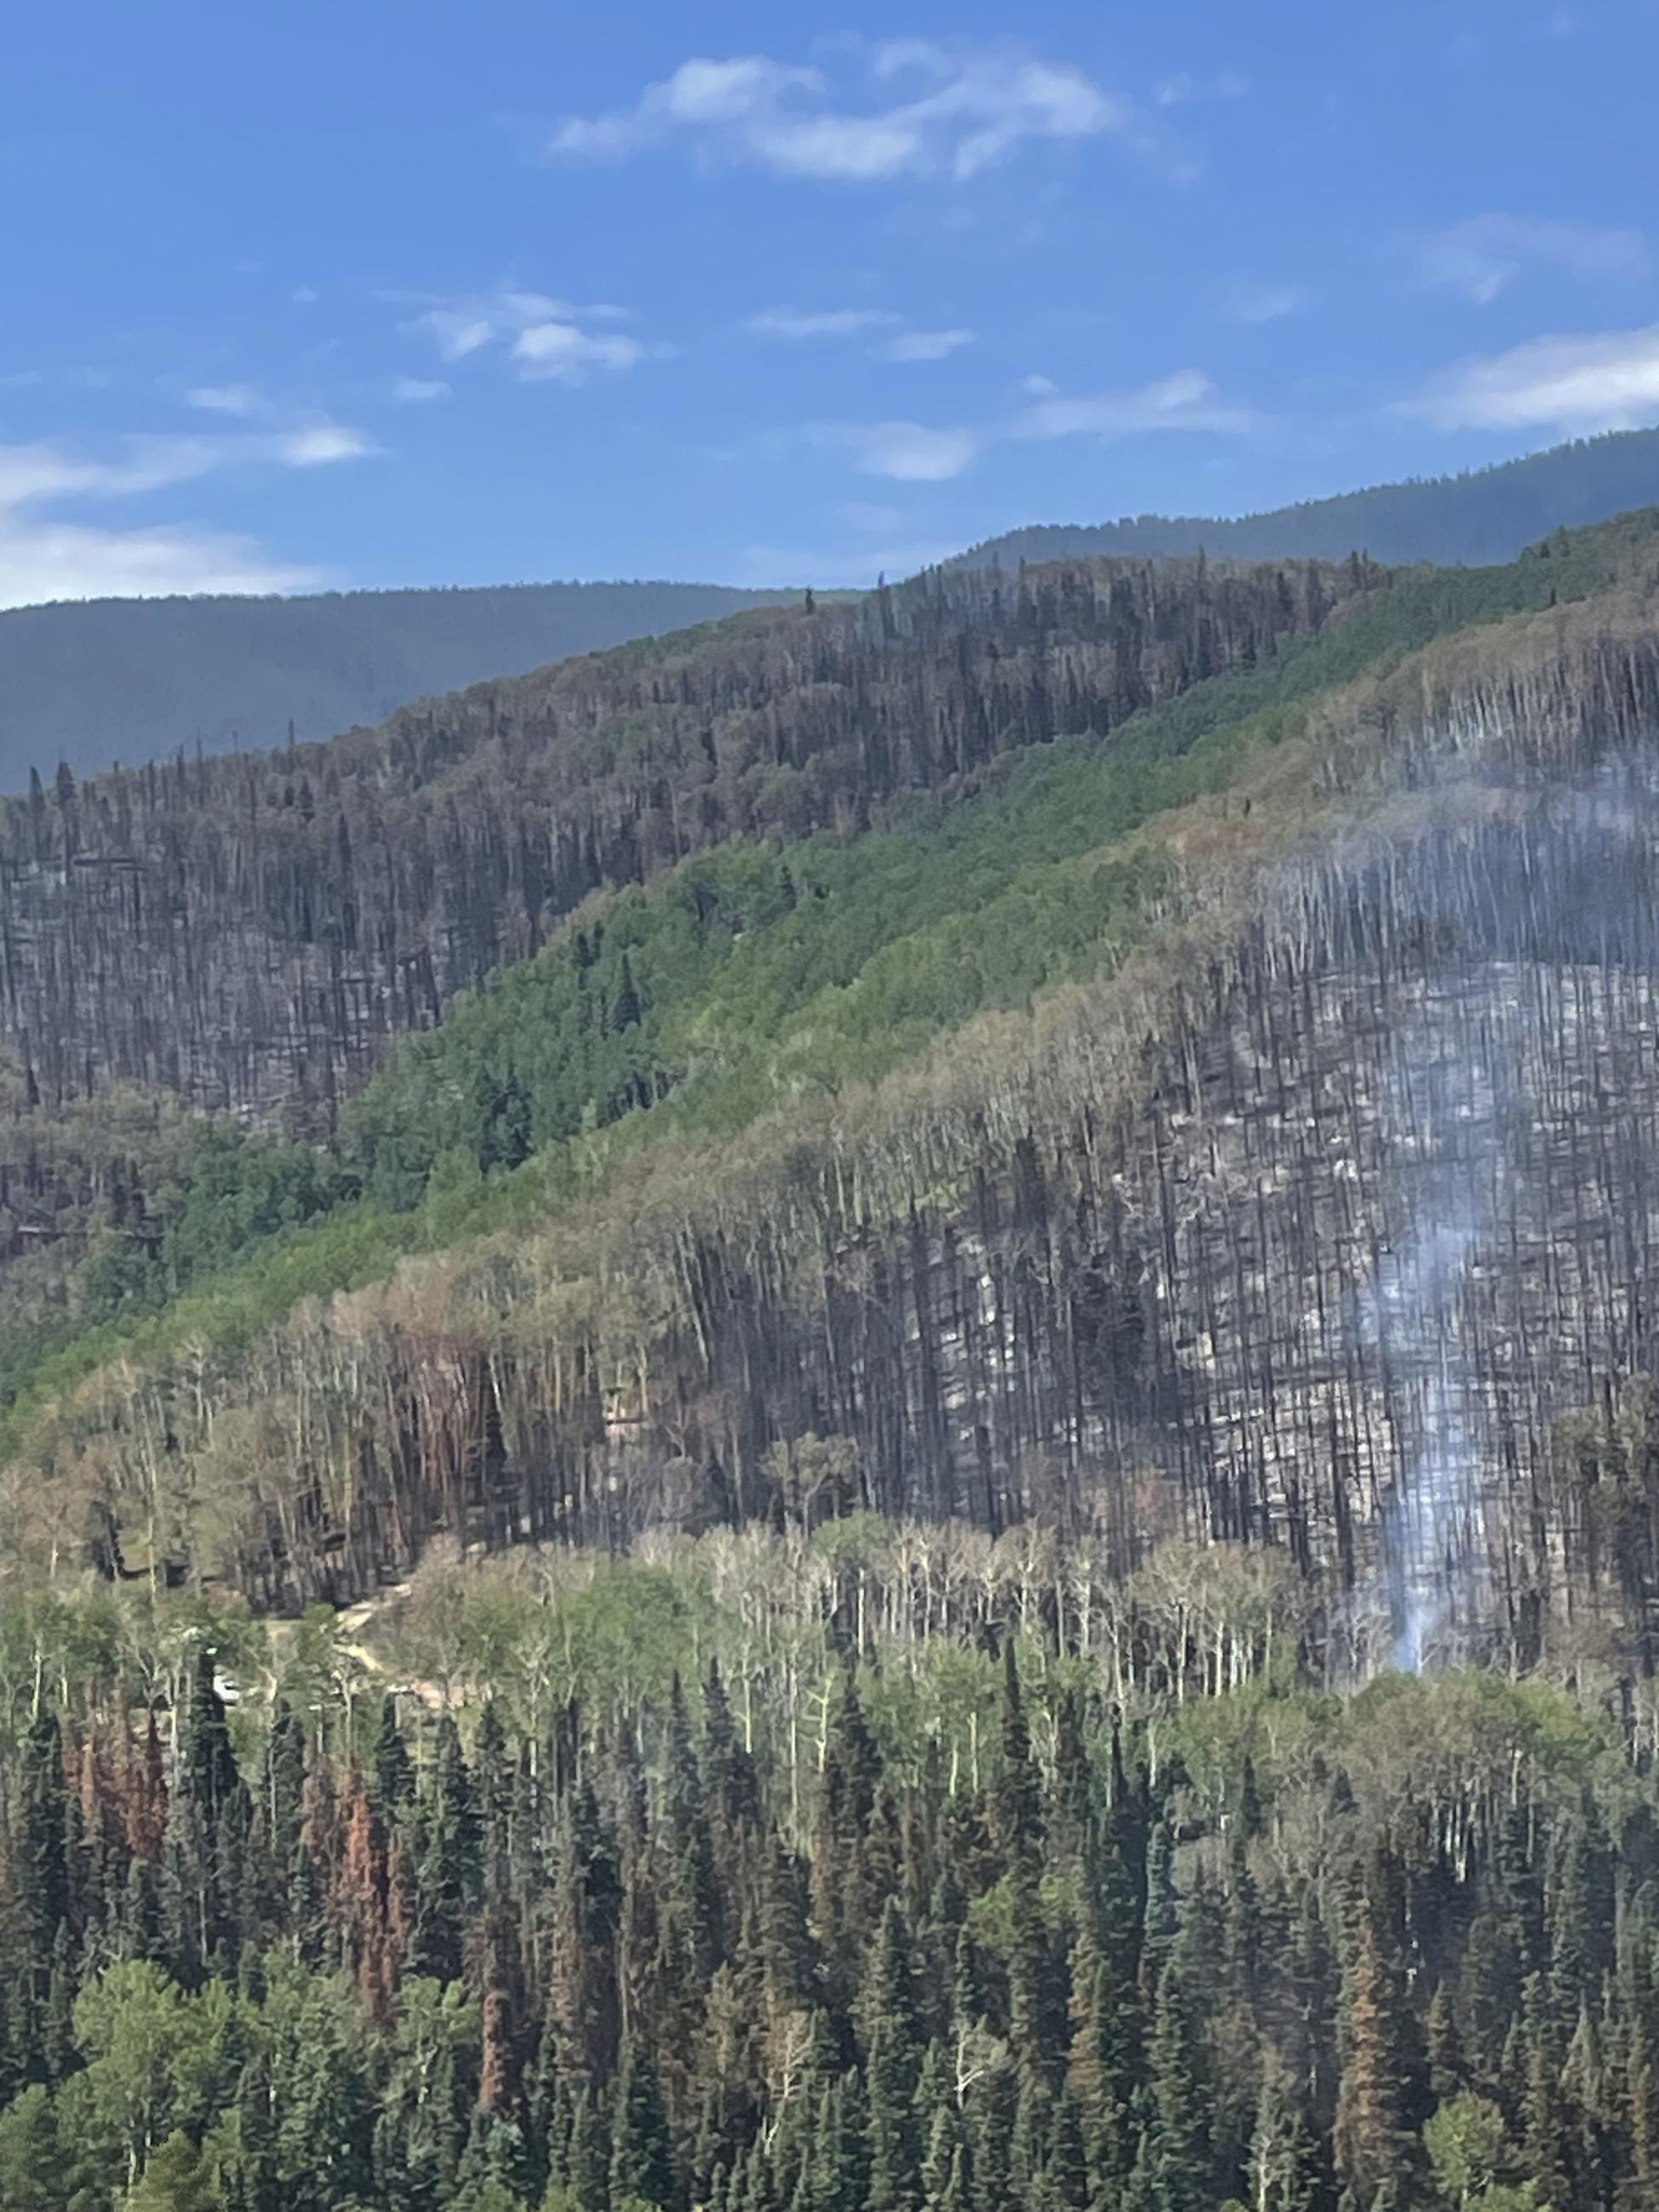 A mountain side after a fire has burned through the forest. It shows how a fire leaves a mosaic pattern where some trees were completely burned while others were partially burned or not at all.